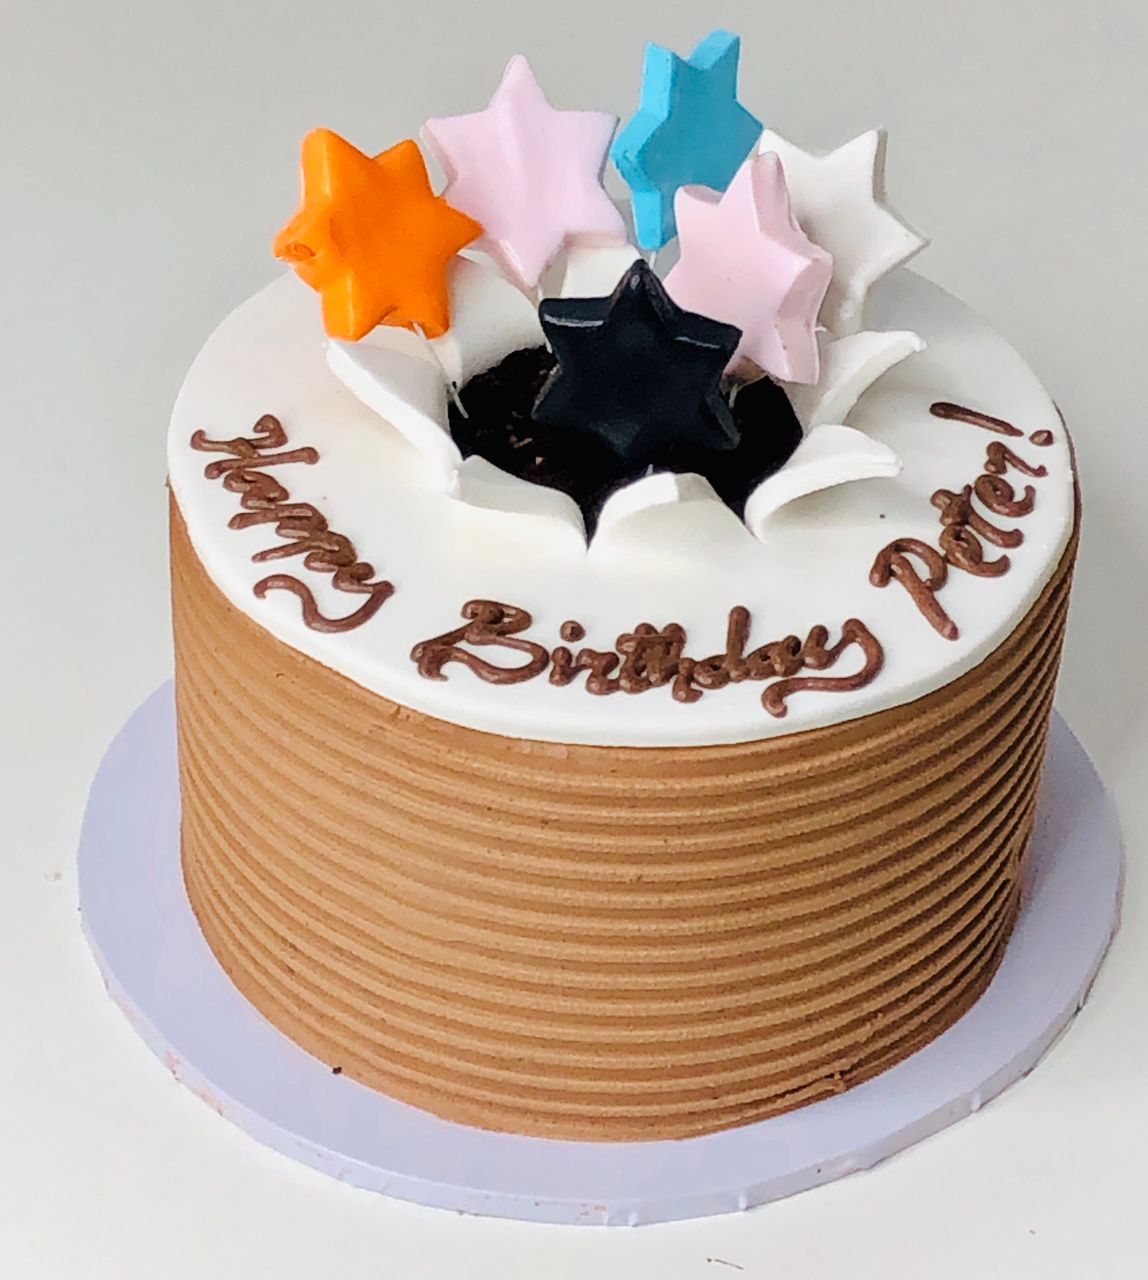 Star Burst -8 inches - Nuts About Cakes | Affordable Cakes in Lagos, Nigeria